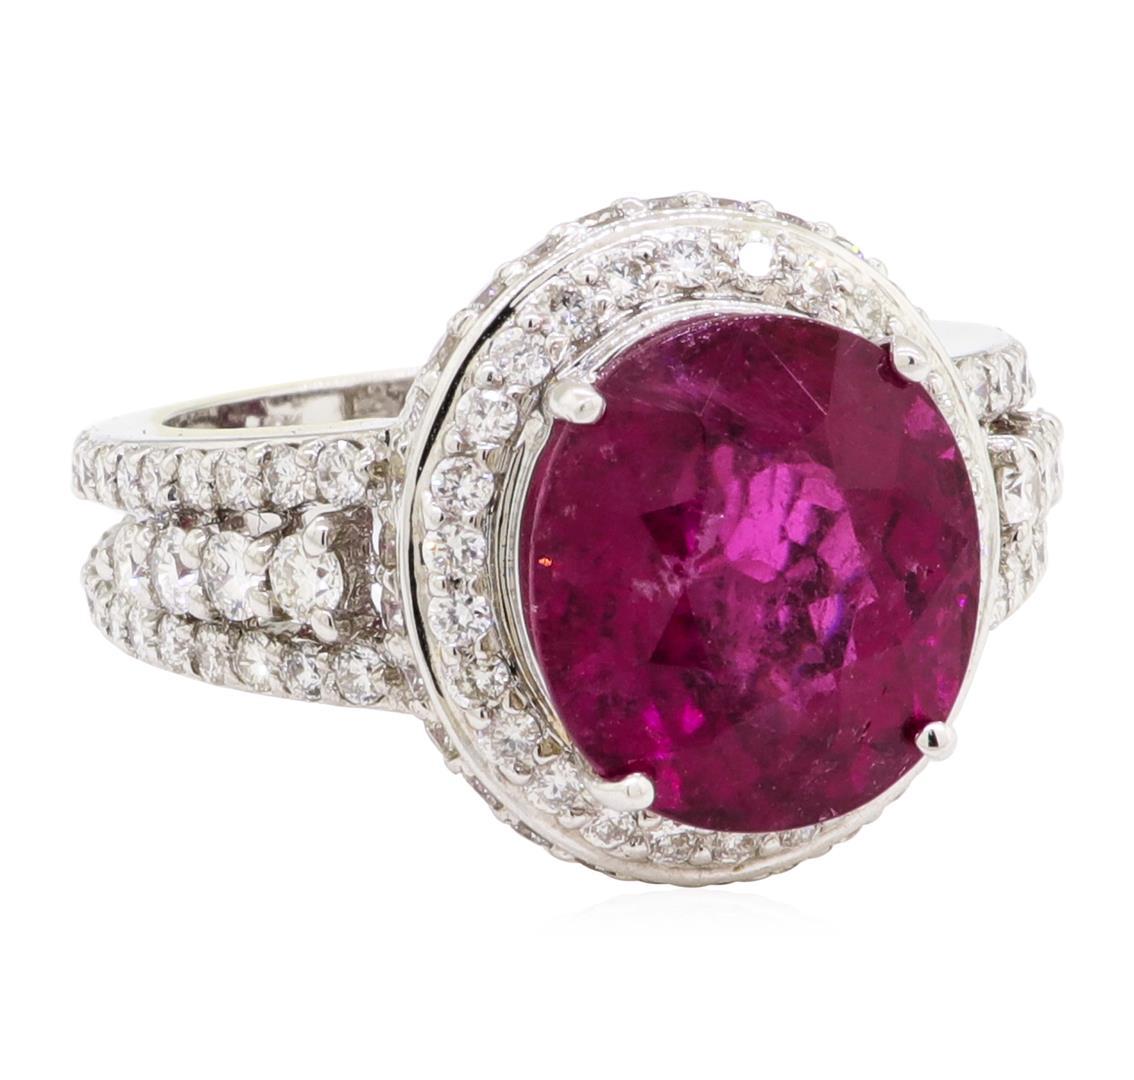 7.49 ctw Oval Mixed Rubellite And Round Brilliant Cut Diamond Ring - 18KT White